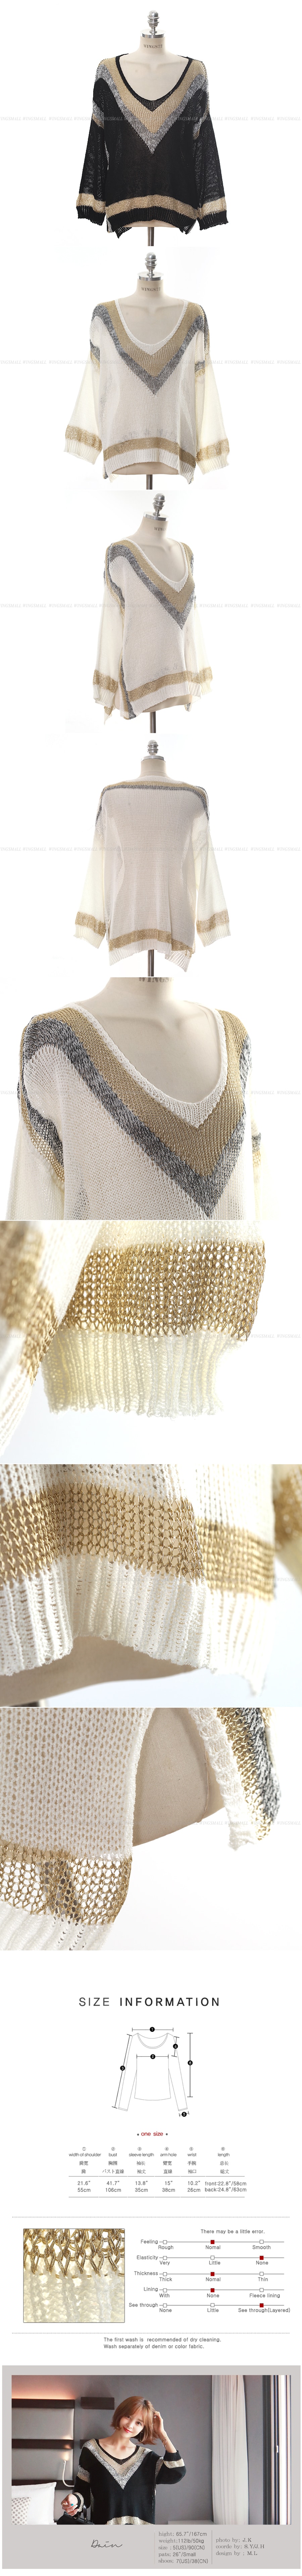 [New Arrival]  V-neck Spun Gold Summer Knit Top #Ivory One Size(S-M)